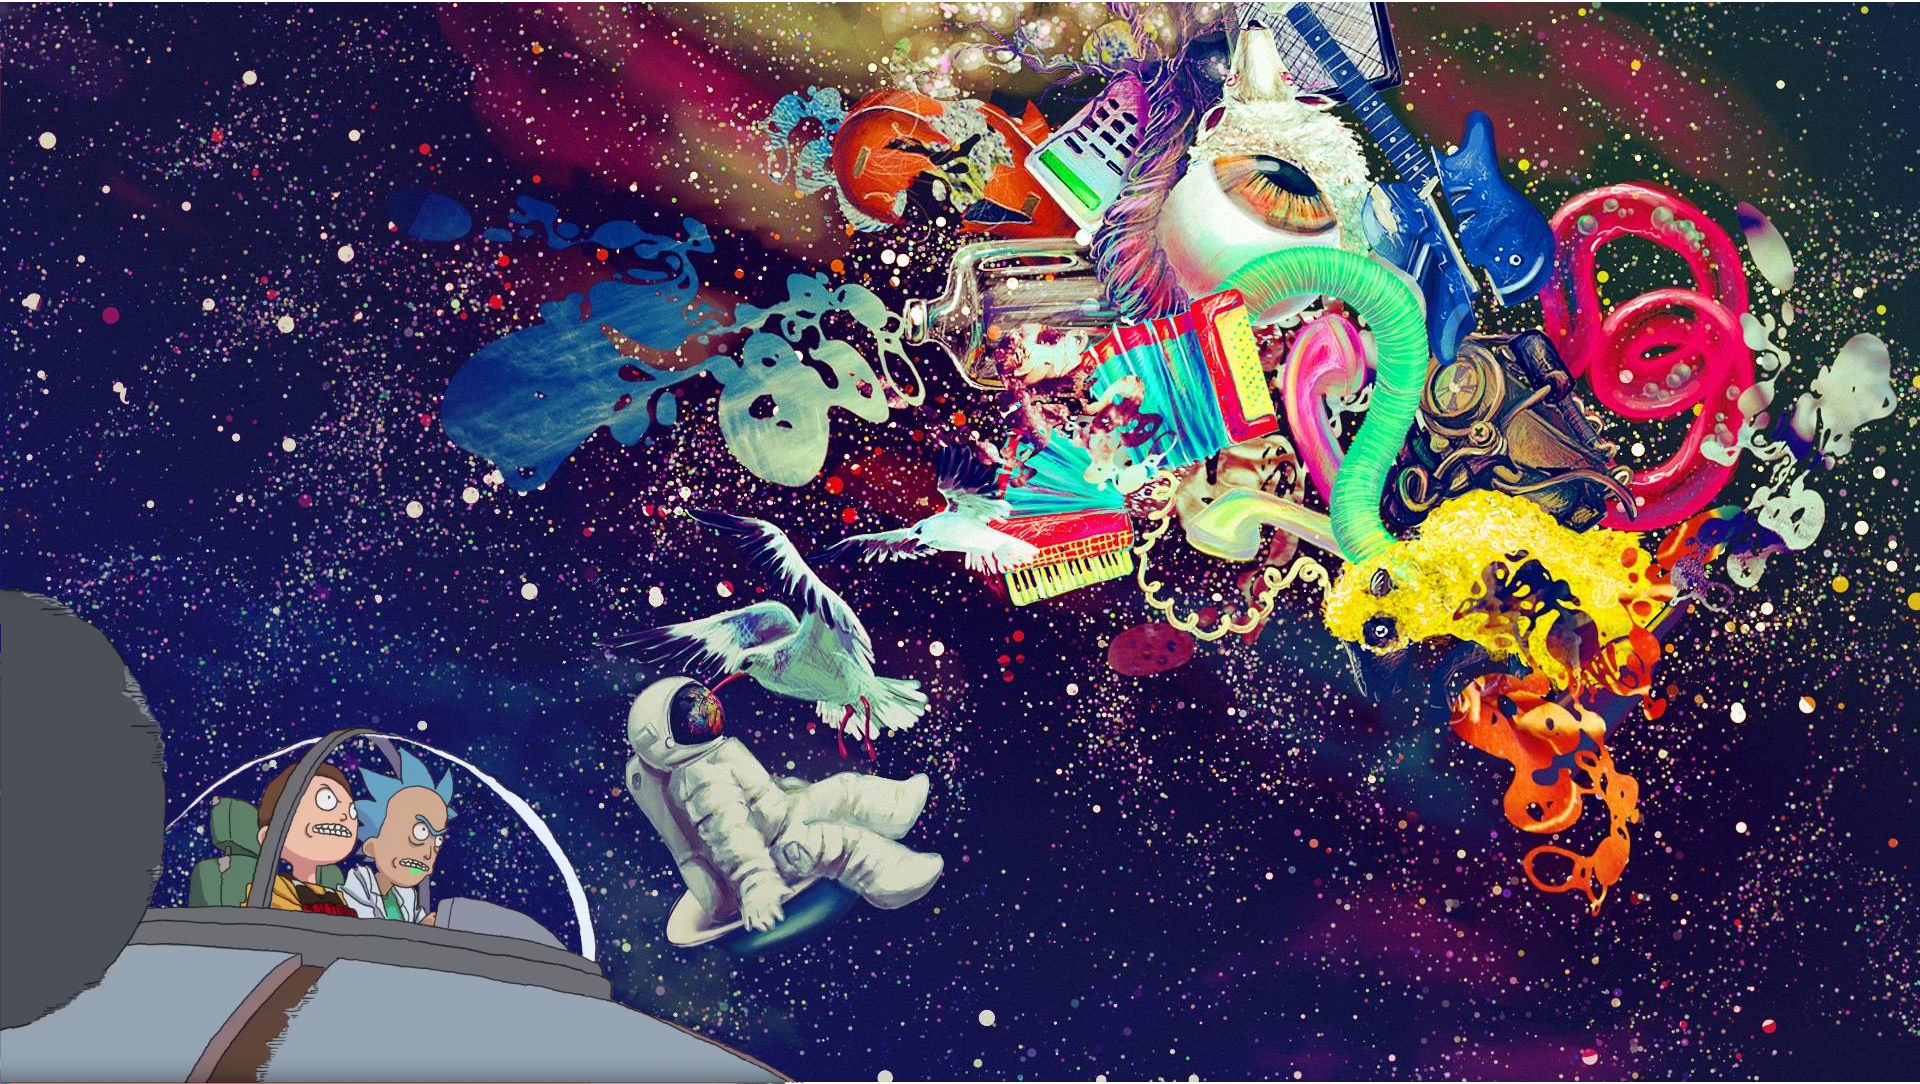 rick and morty wallpaper,illustration,cartoon,graphic design,art,space